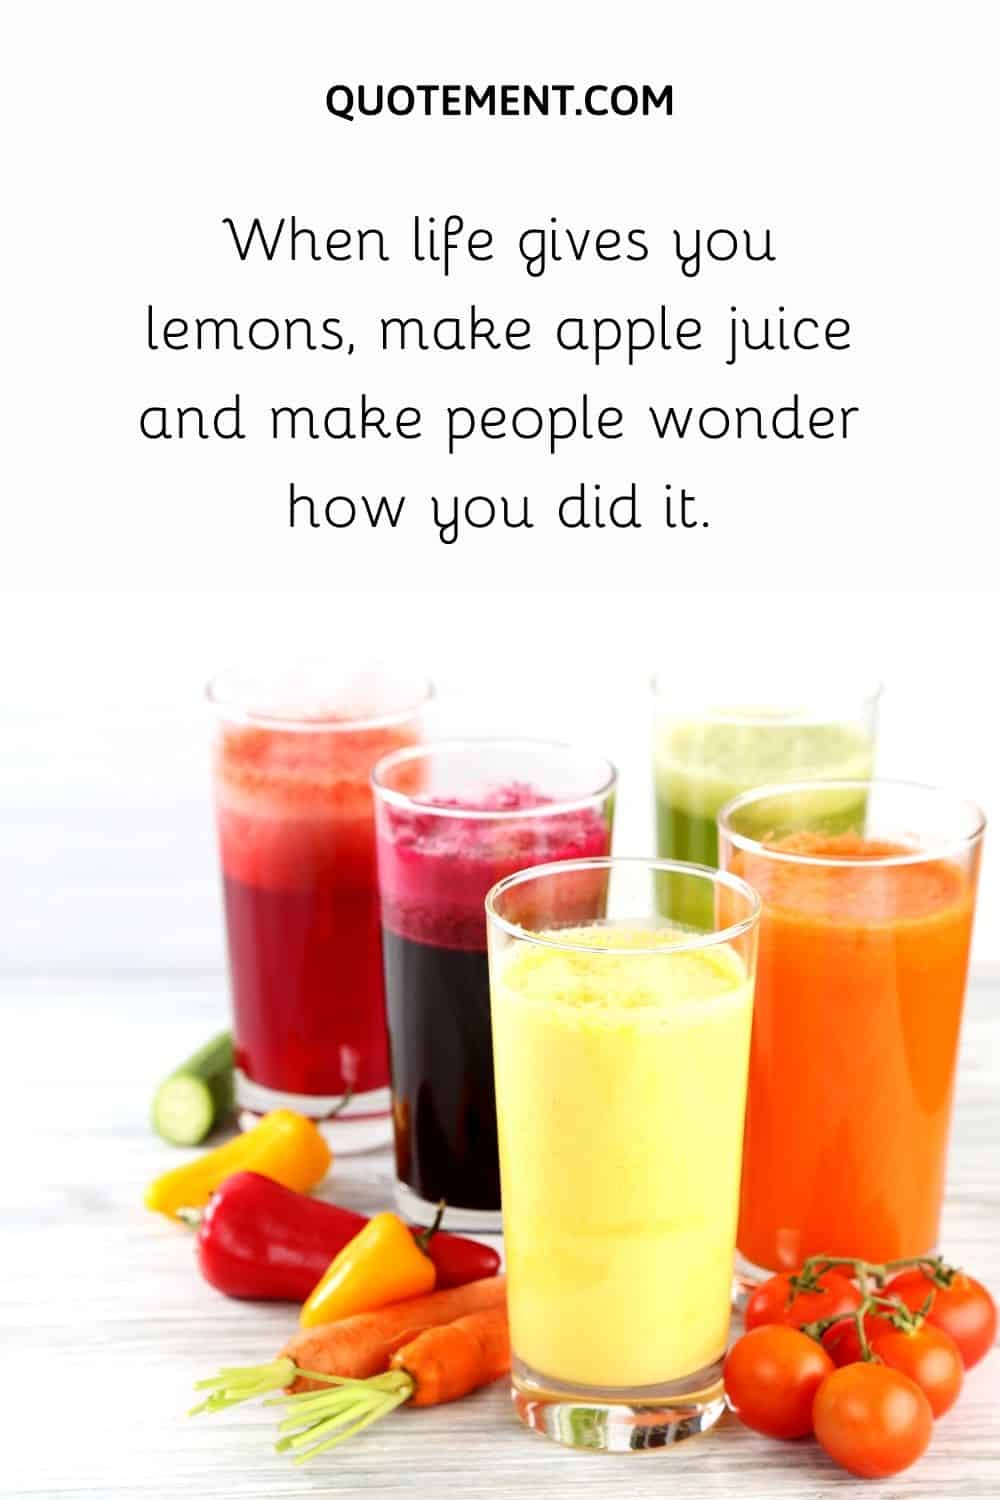 When life gives you lemons, make apple juice and make people wonder how you did it